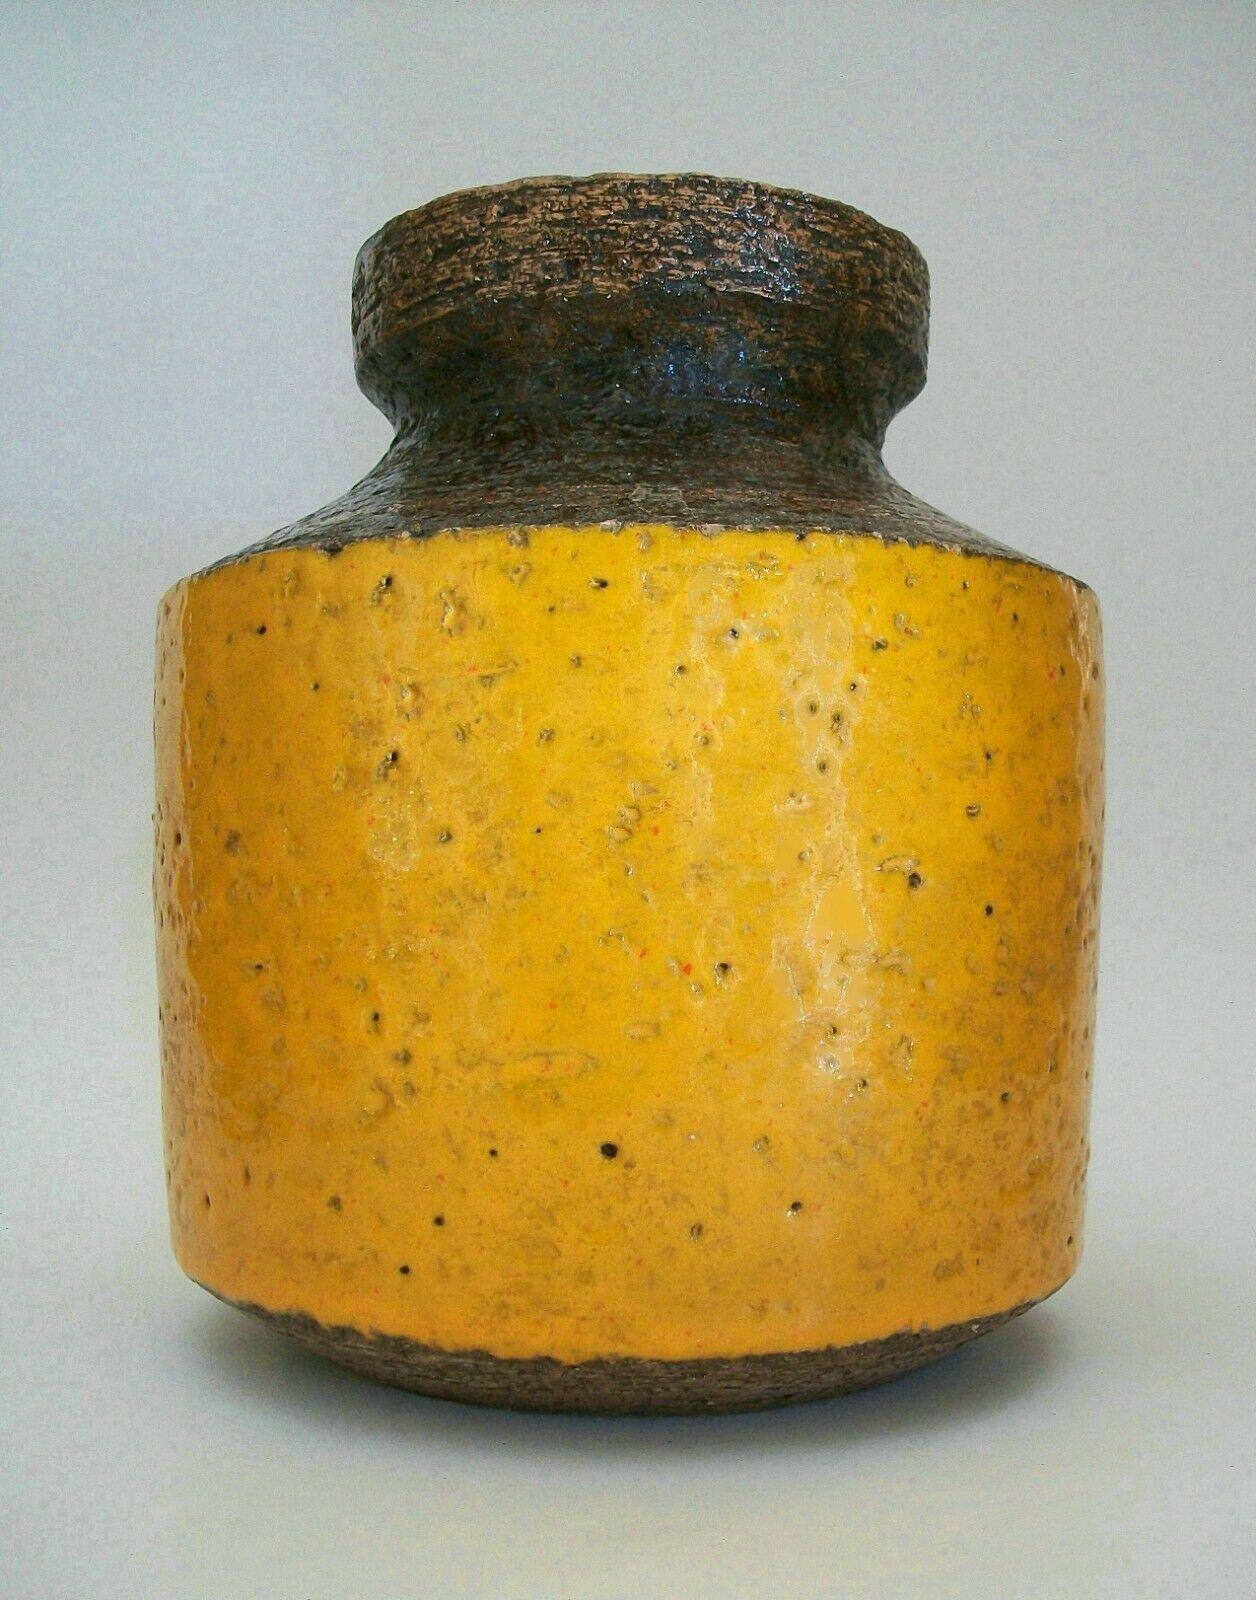 Bitossi (Manufacturer) - Aldo Londi (Designer) - rare mid century studio pottery vase - hand made - featuring a color block palette of mustard and brown glazes with a white glazed interior - textured finish - signed on the base - Italy - circa